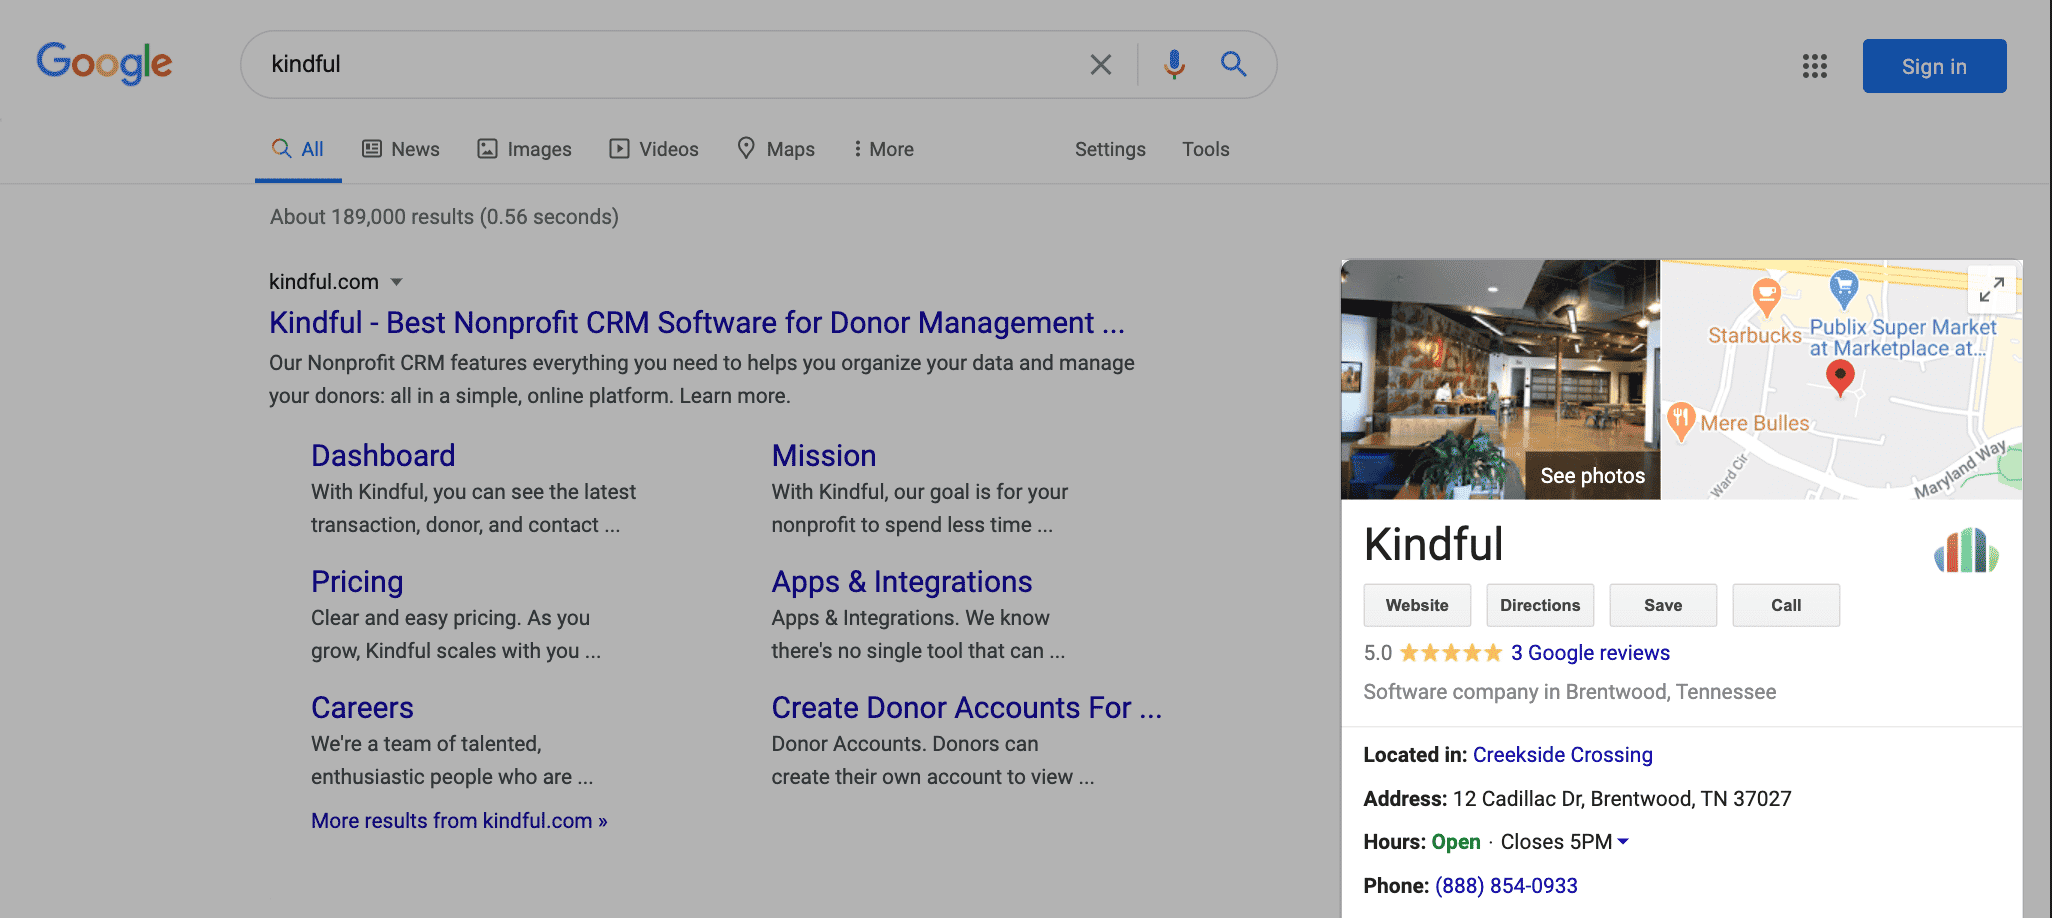 example of a google knowledge panel with contact information